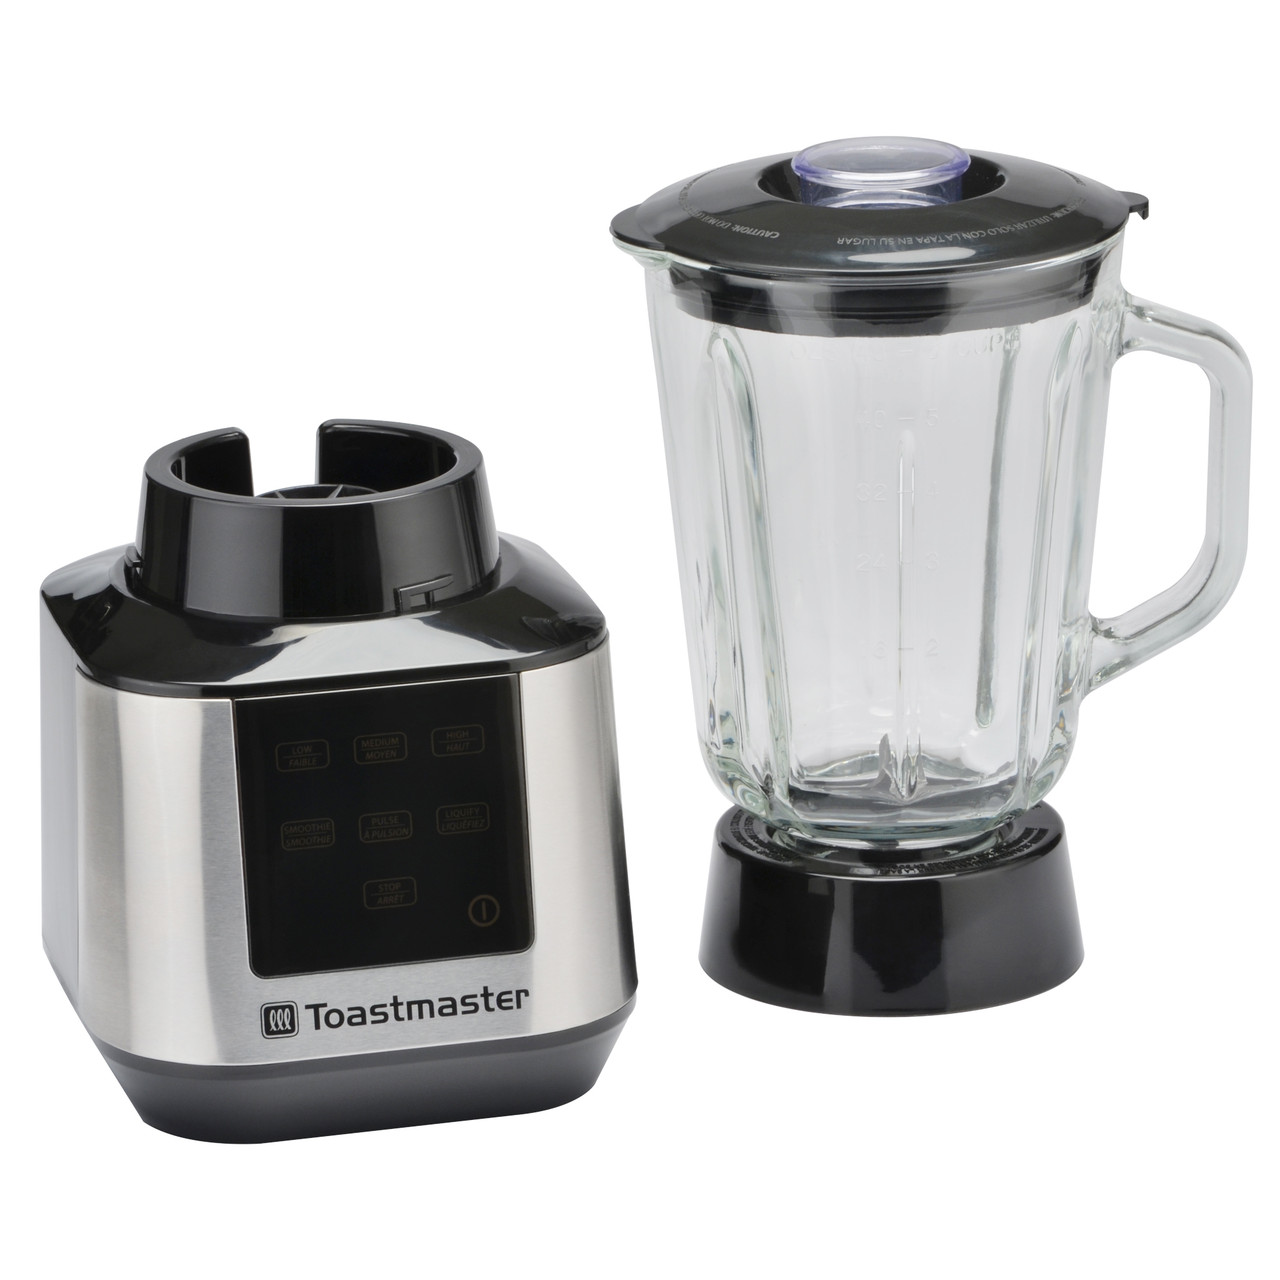 Toastmaster Immersion Hand Blender Mixer Black, 700ml Blending Cup 100W  open Box